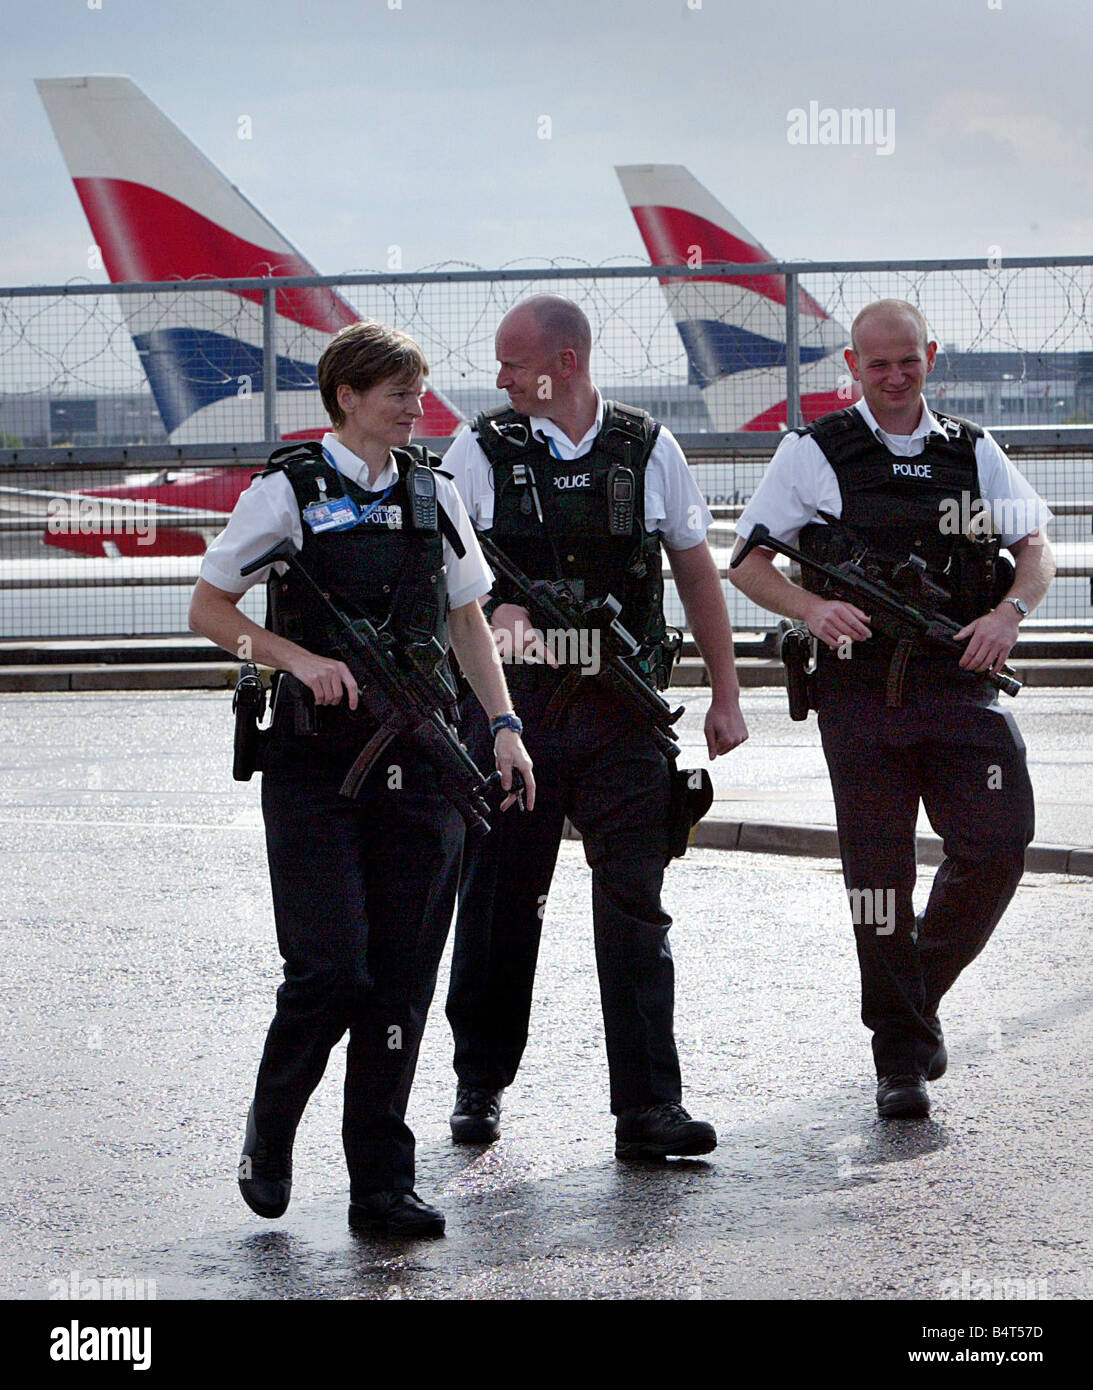 Armed police officers arrives at Terminal 4 at Heathrow Airport London after anti terrorism units of the metropolitian police and MI5 thwarted a terrorist plot to blow up several aircraft in flight between the United States and the United Kingdom using explosives smuggled in hand luggage August 2006 Stock Photo